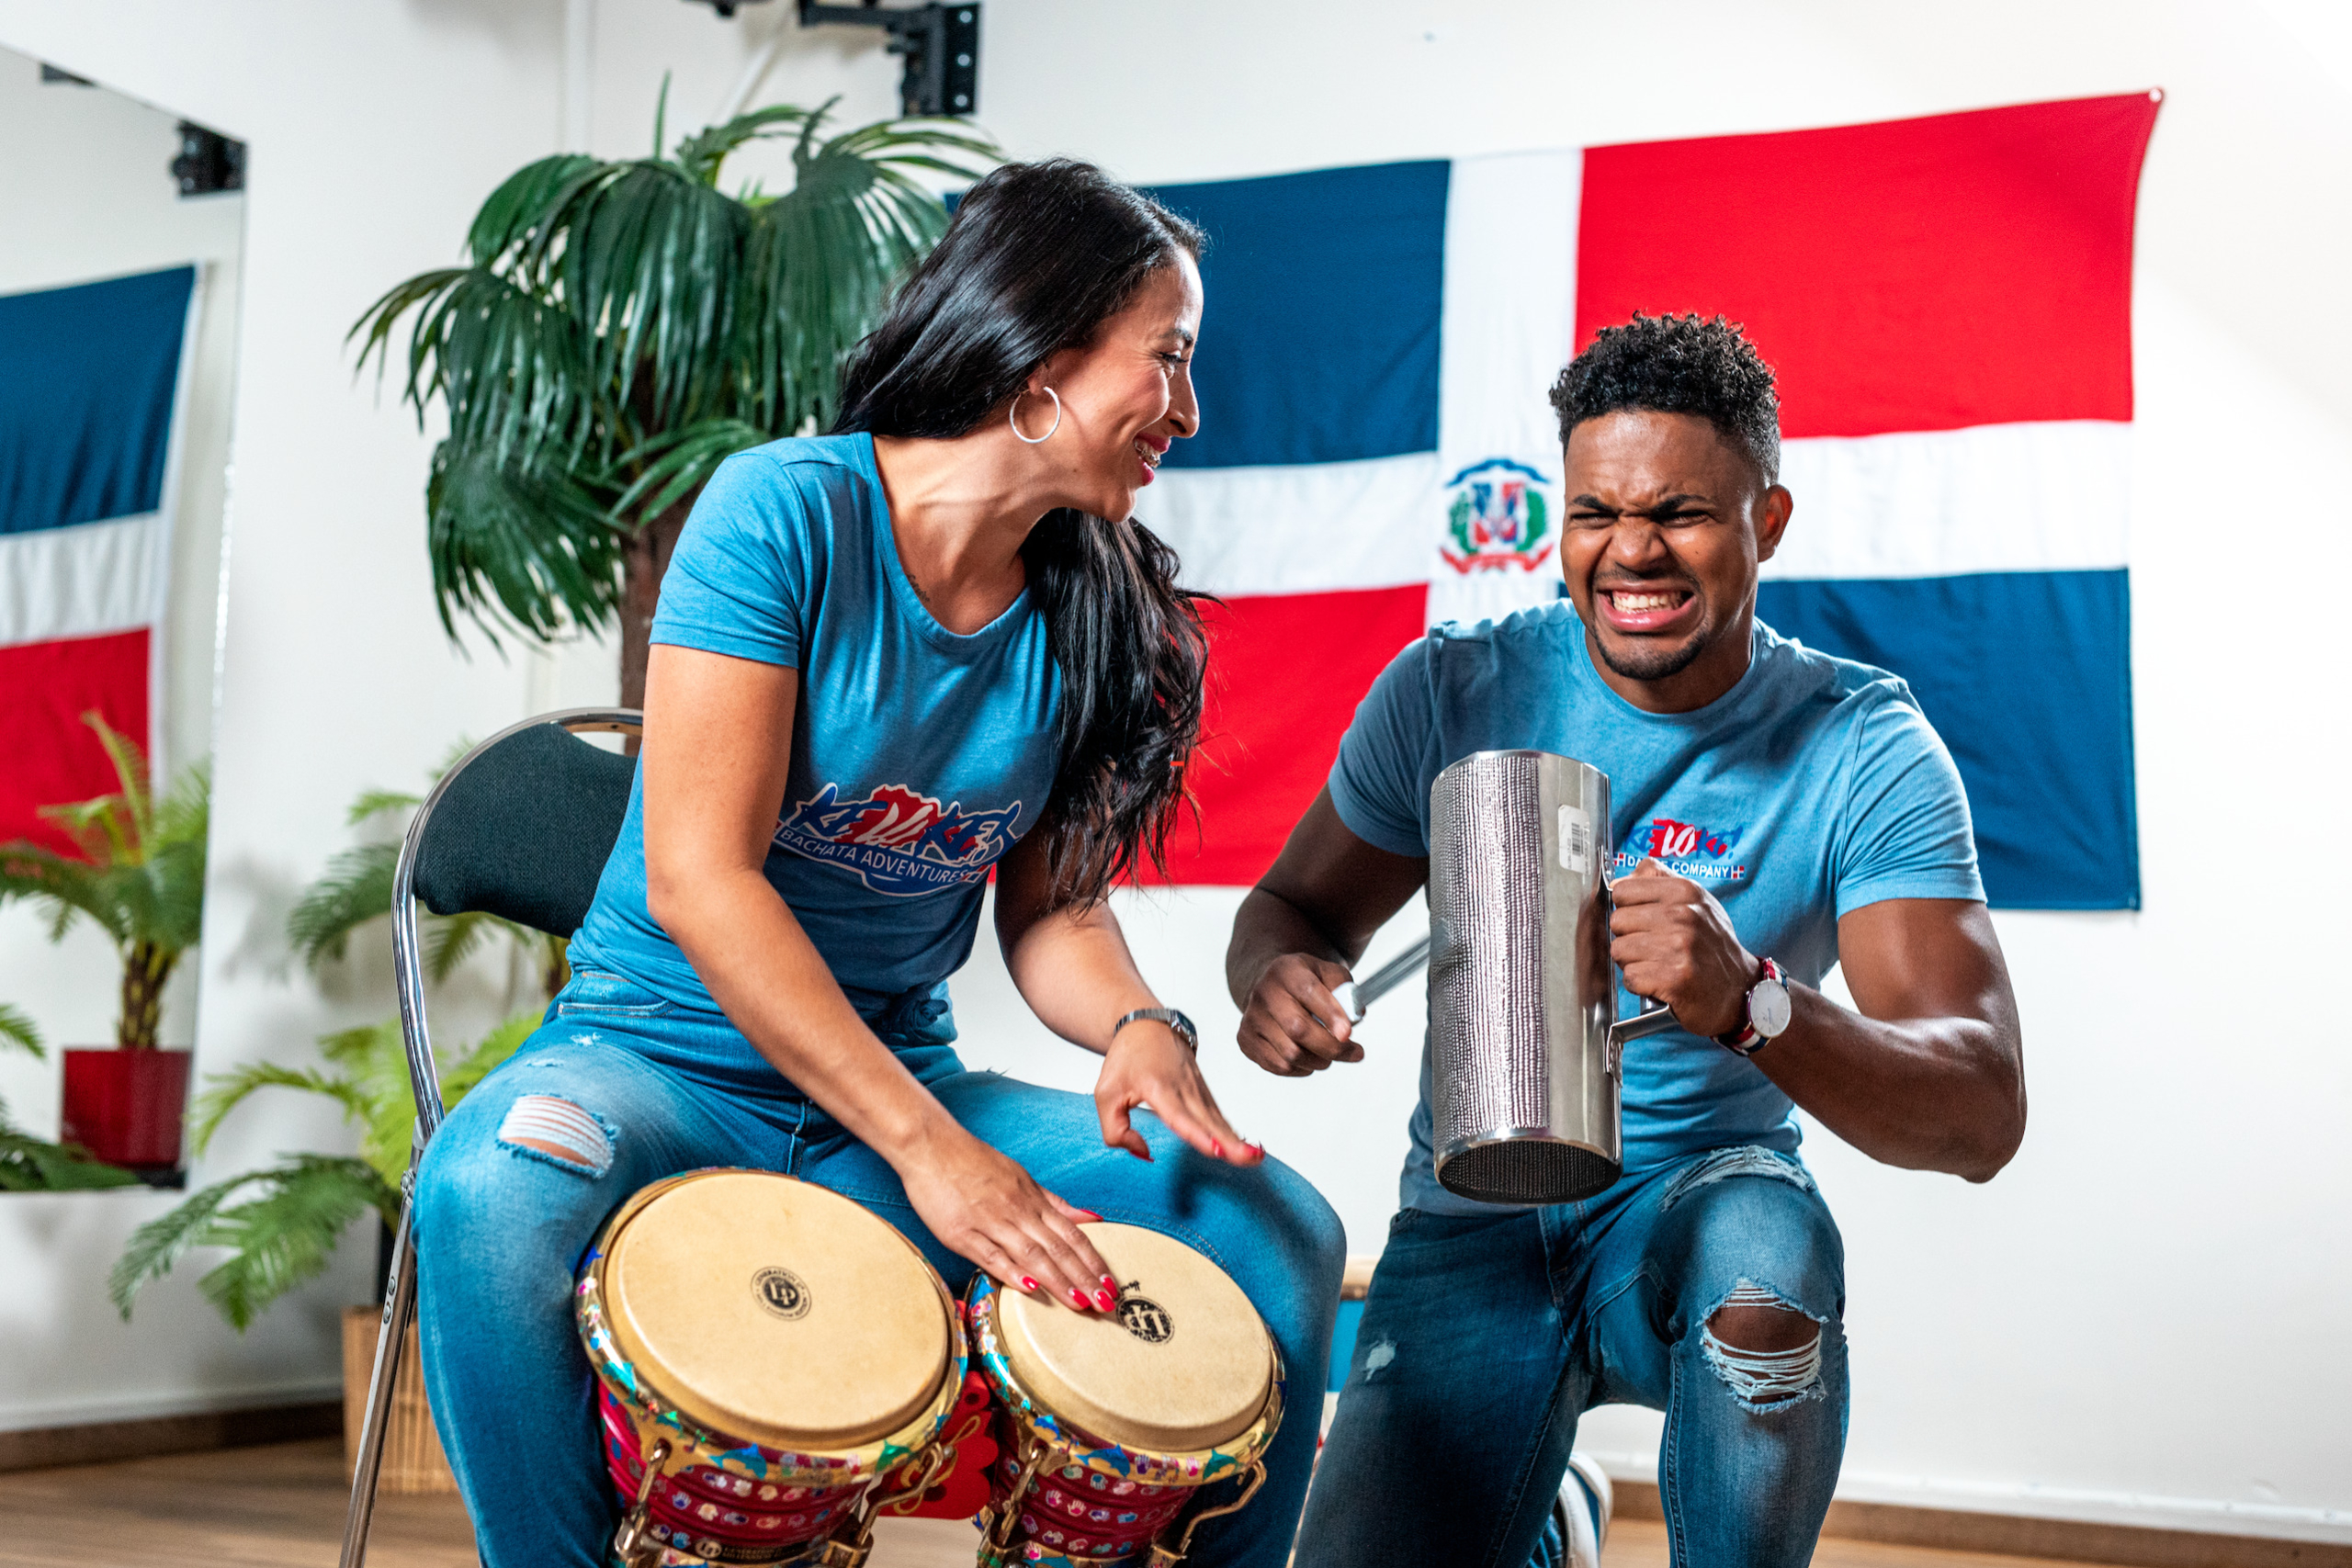 Junior and Carolina playing the bachata instruments, guira and bongo. The Dominican flag is in the backdrop.